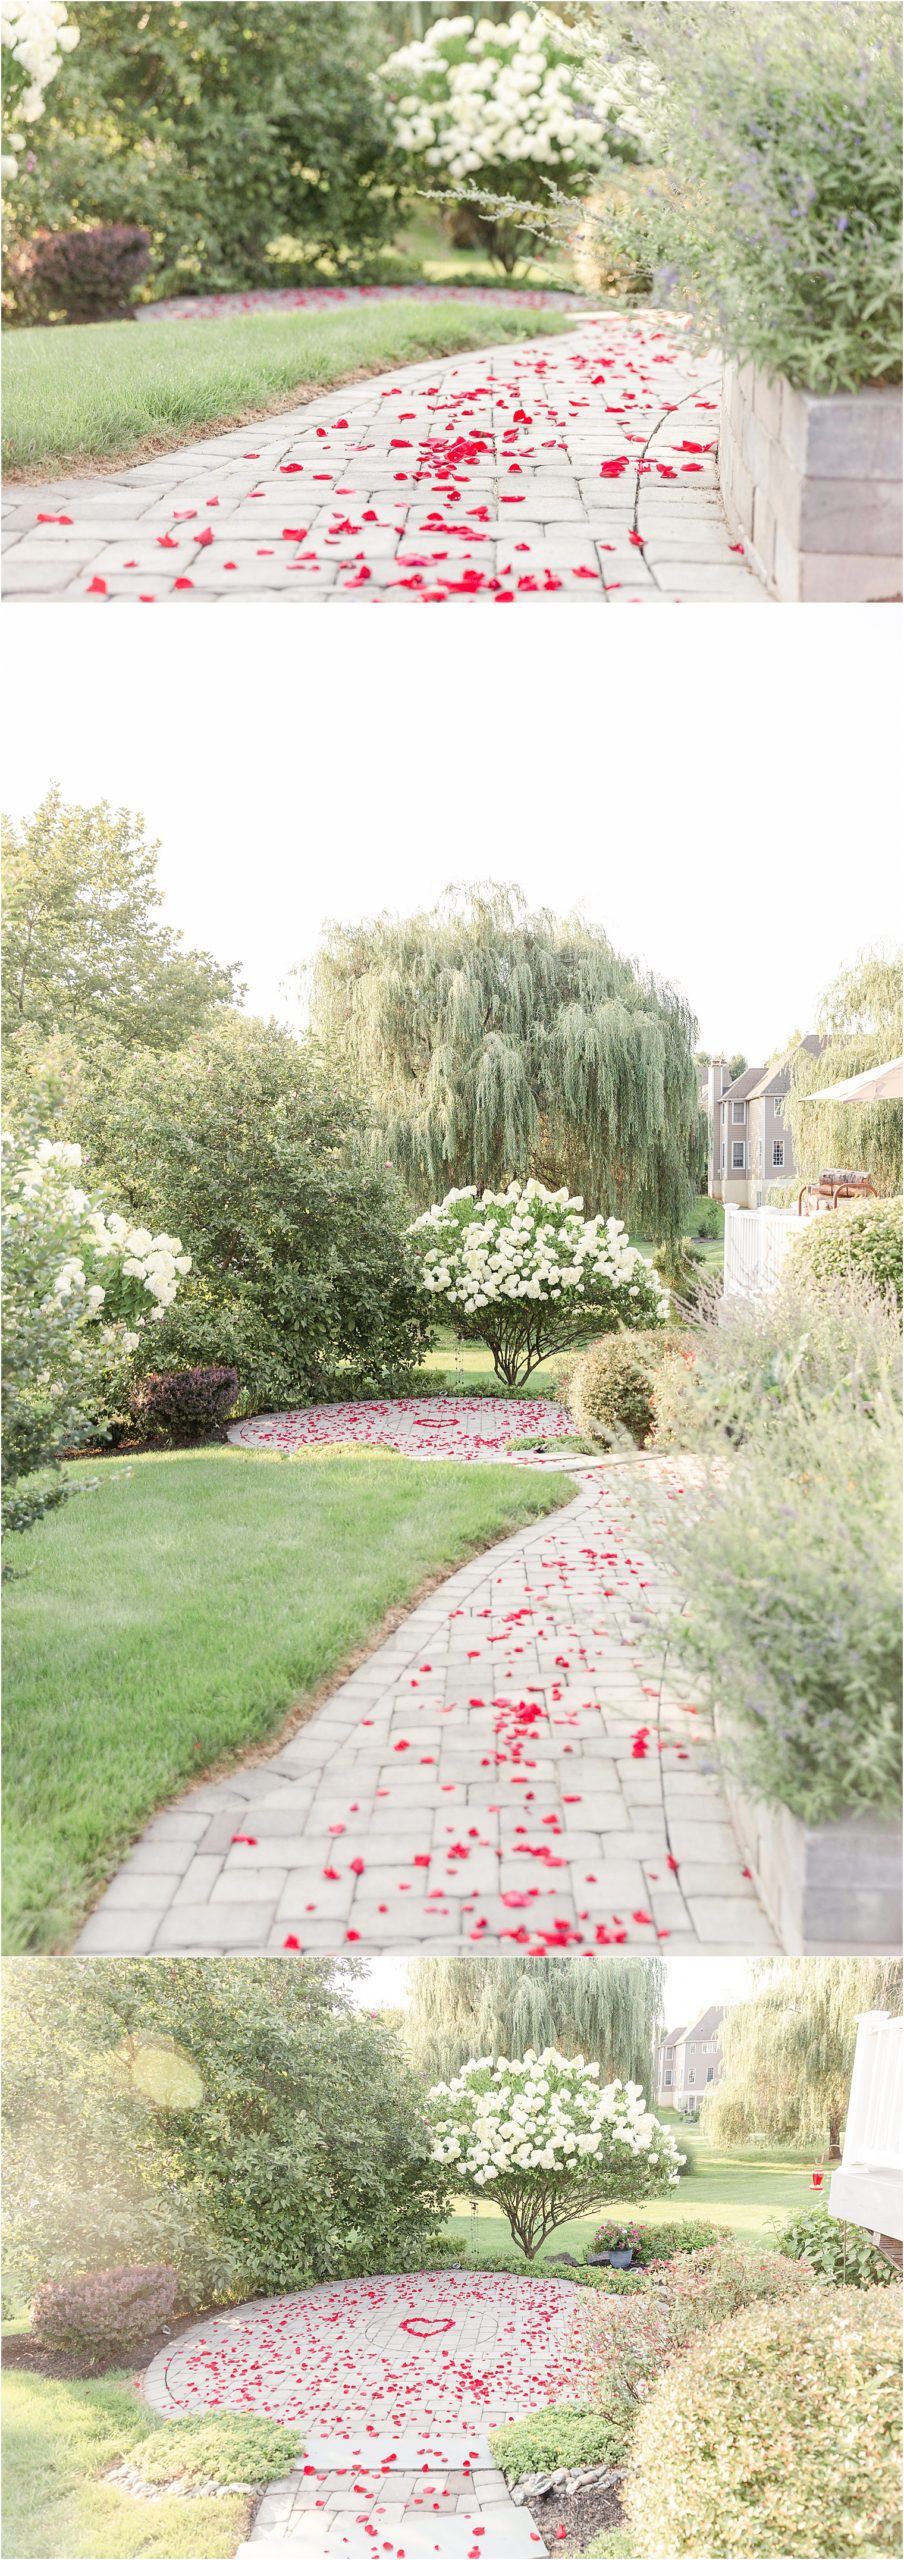 Backyard Engagement in Malvern Pa with rose petals leading to the proposal spot